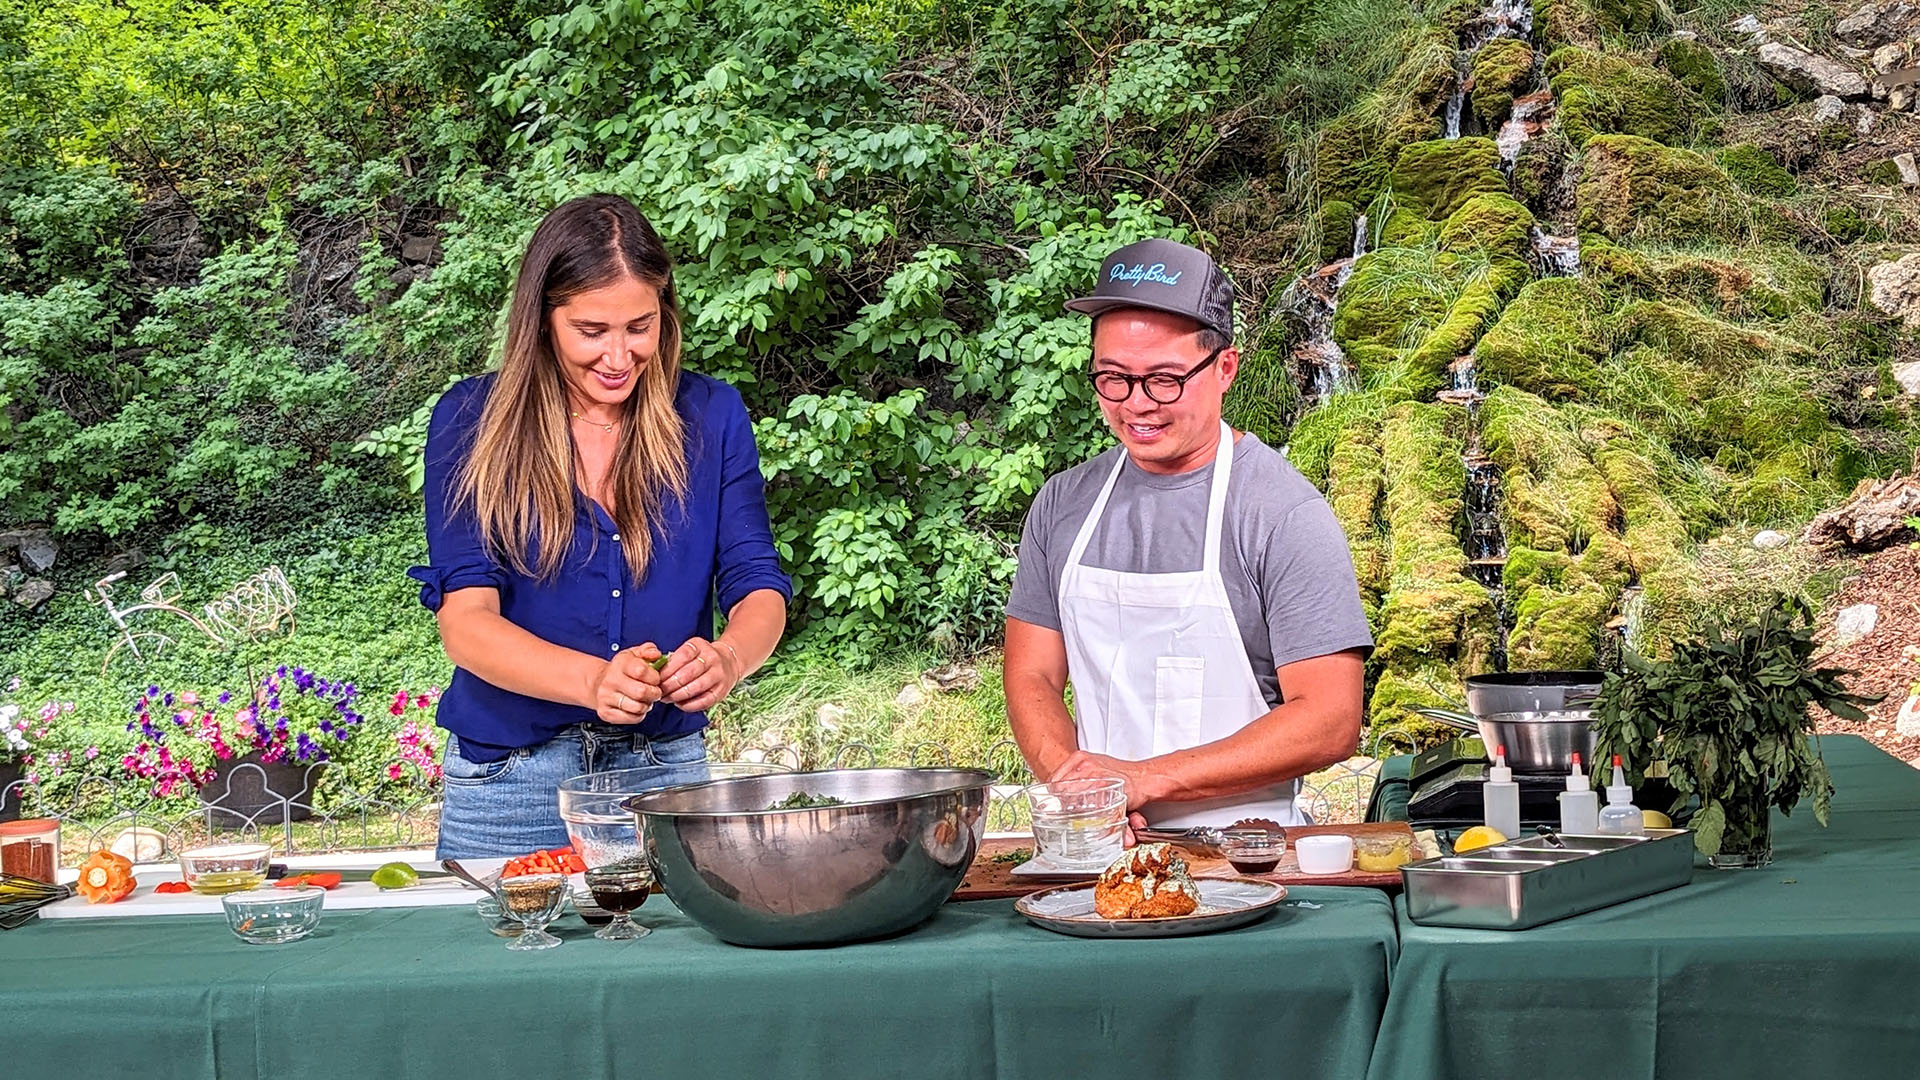 A man and woman combine ingredients in bowls on a table while doing a cooking demonstration outdoors.